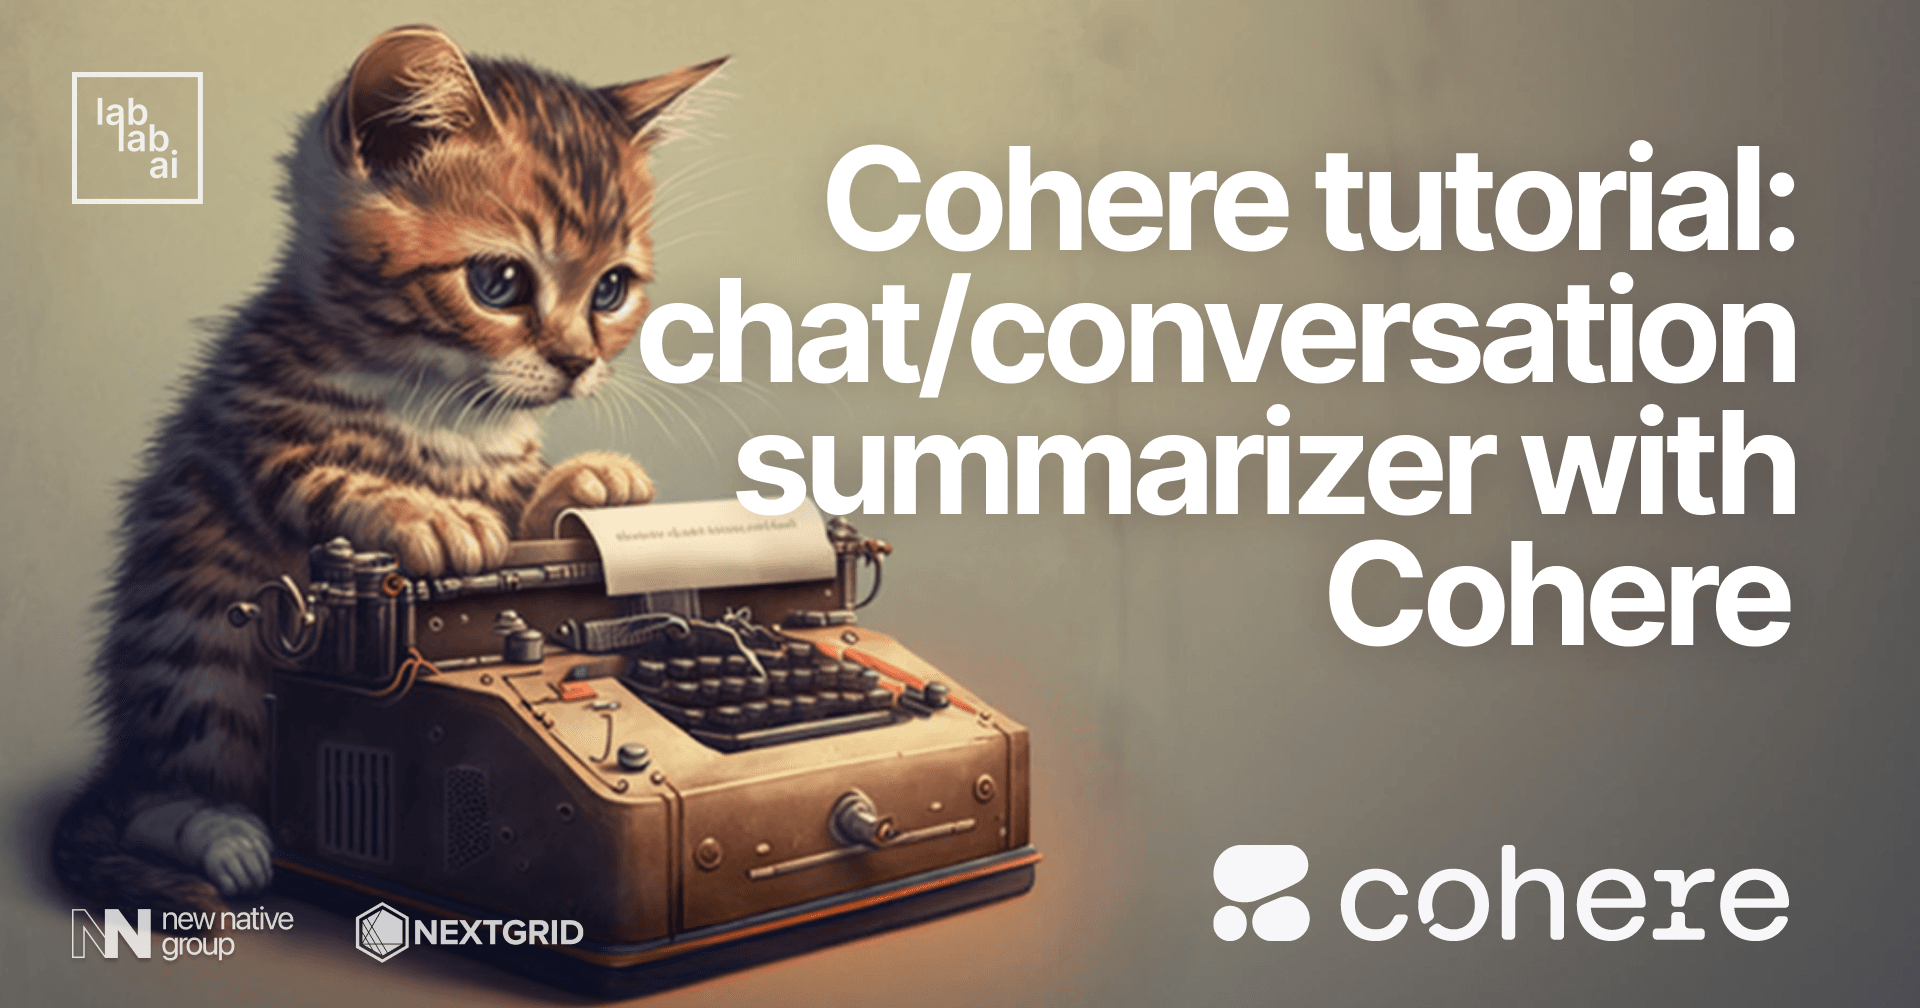 Cohere tutorial: chat/conversation Summarizer with Cohere